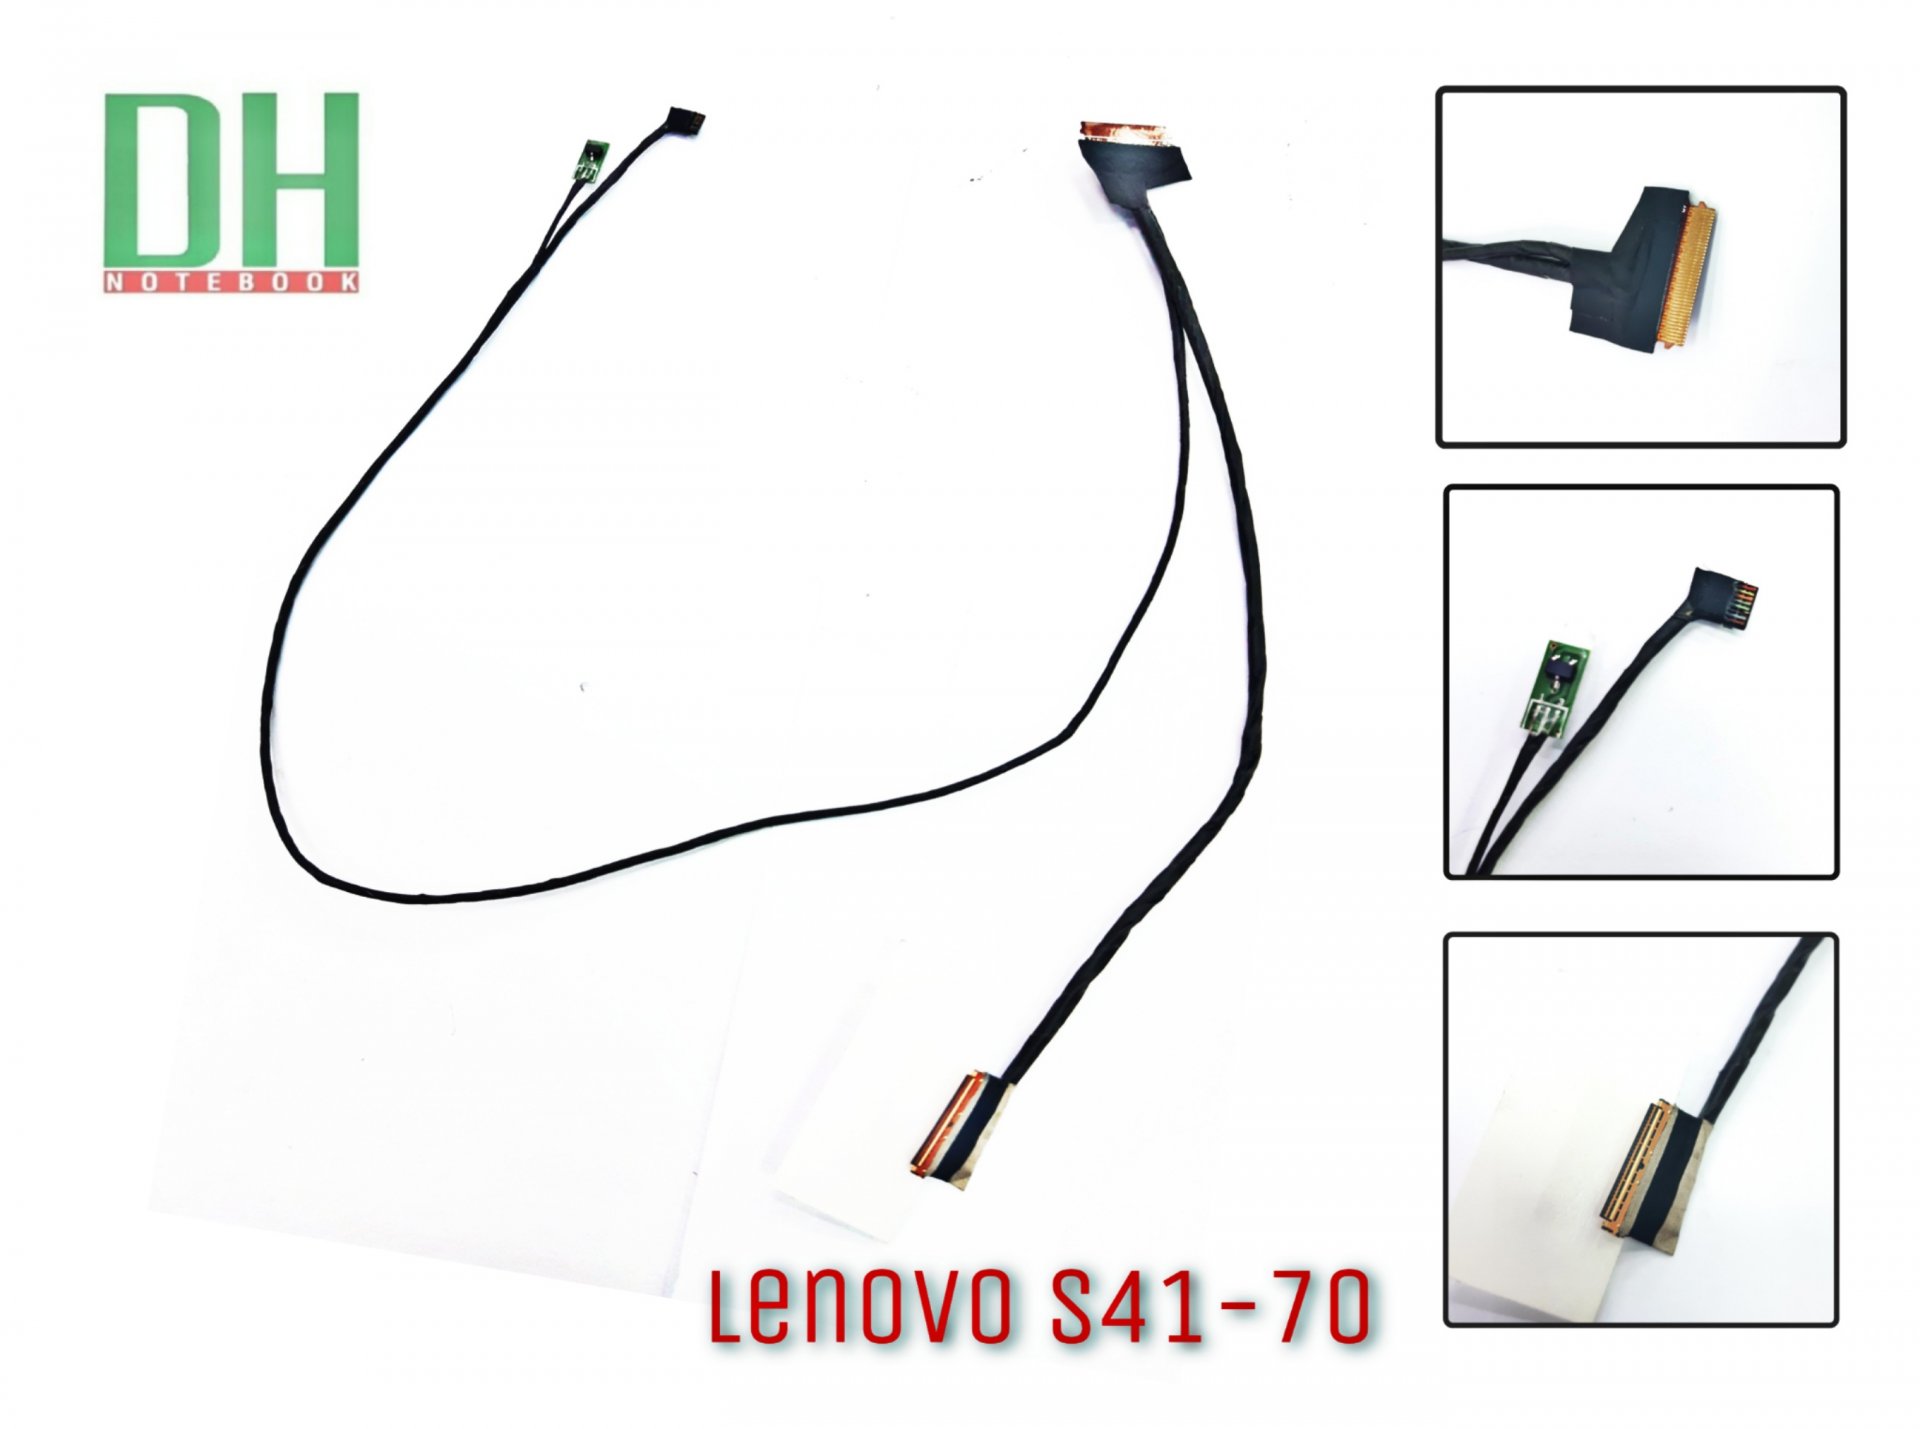 Le s41-70 Video Cable